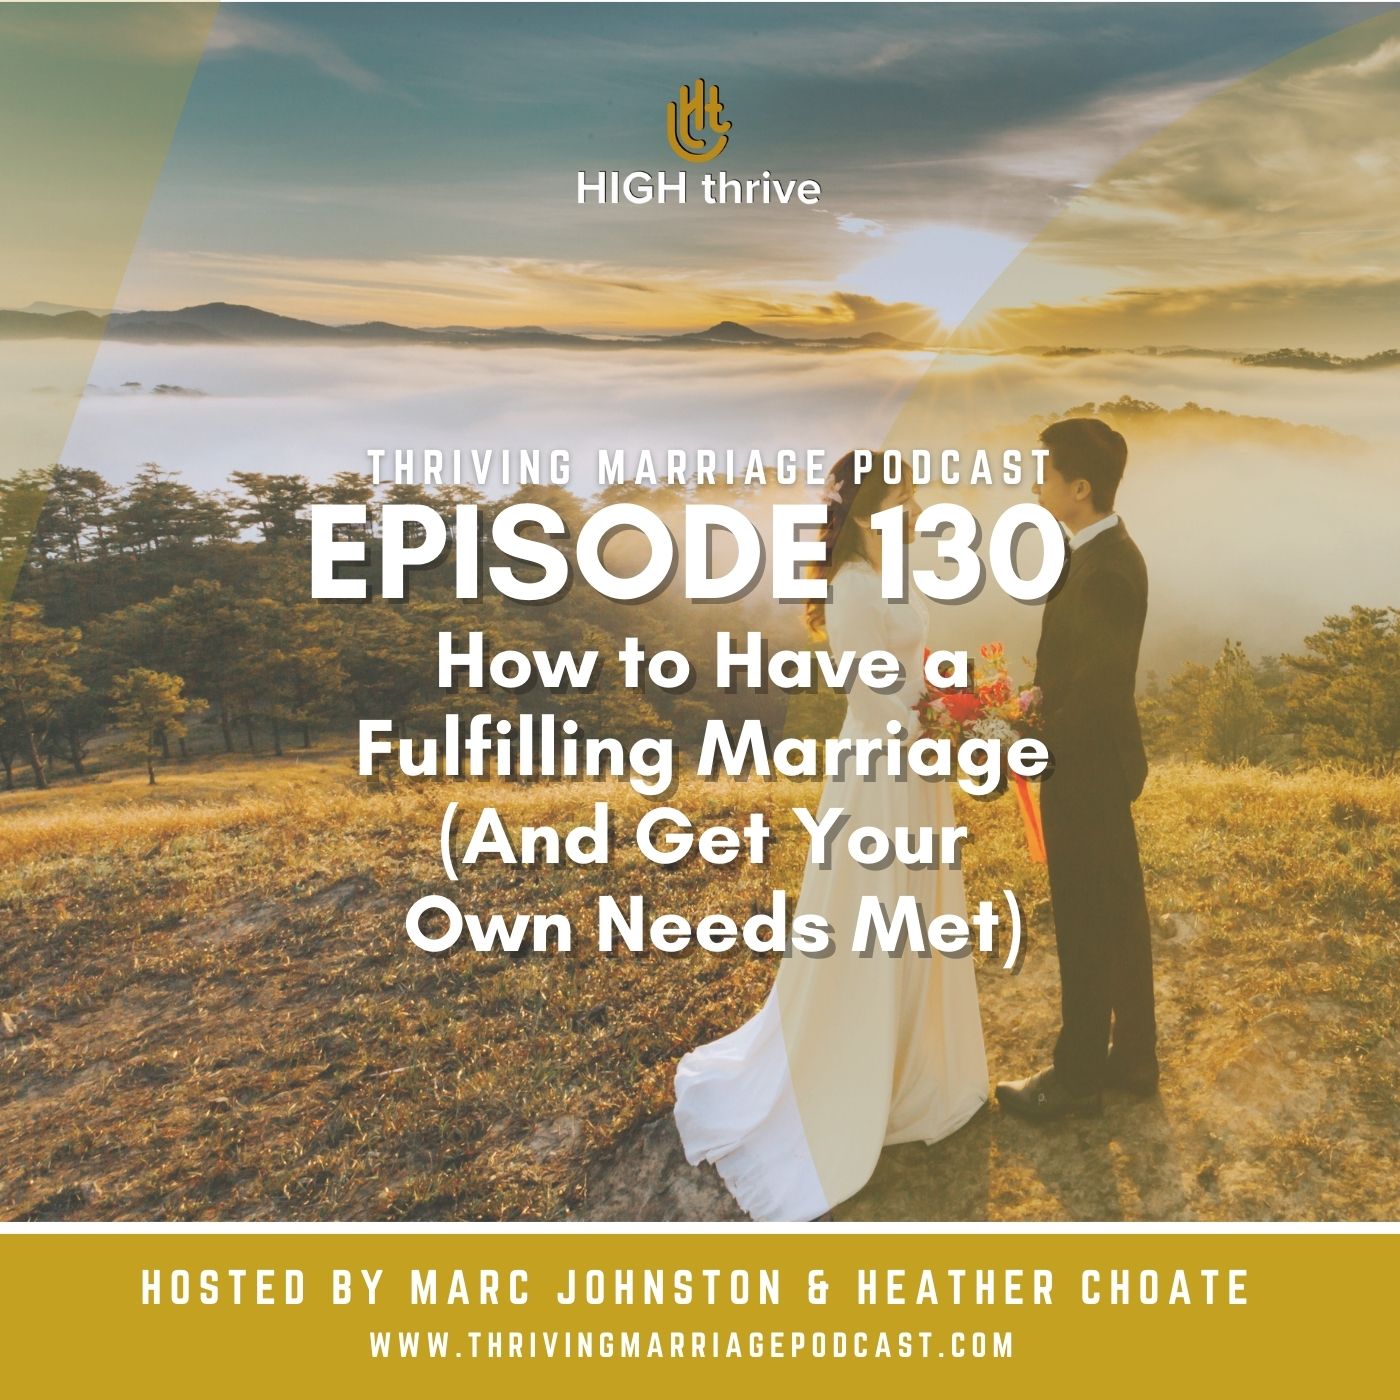 Episode 130: How to Have a Fulfilling Marriage And Get Your Own Needs Met